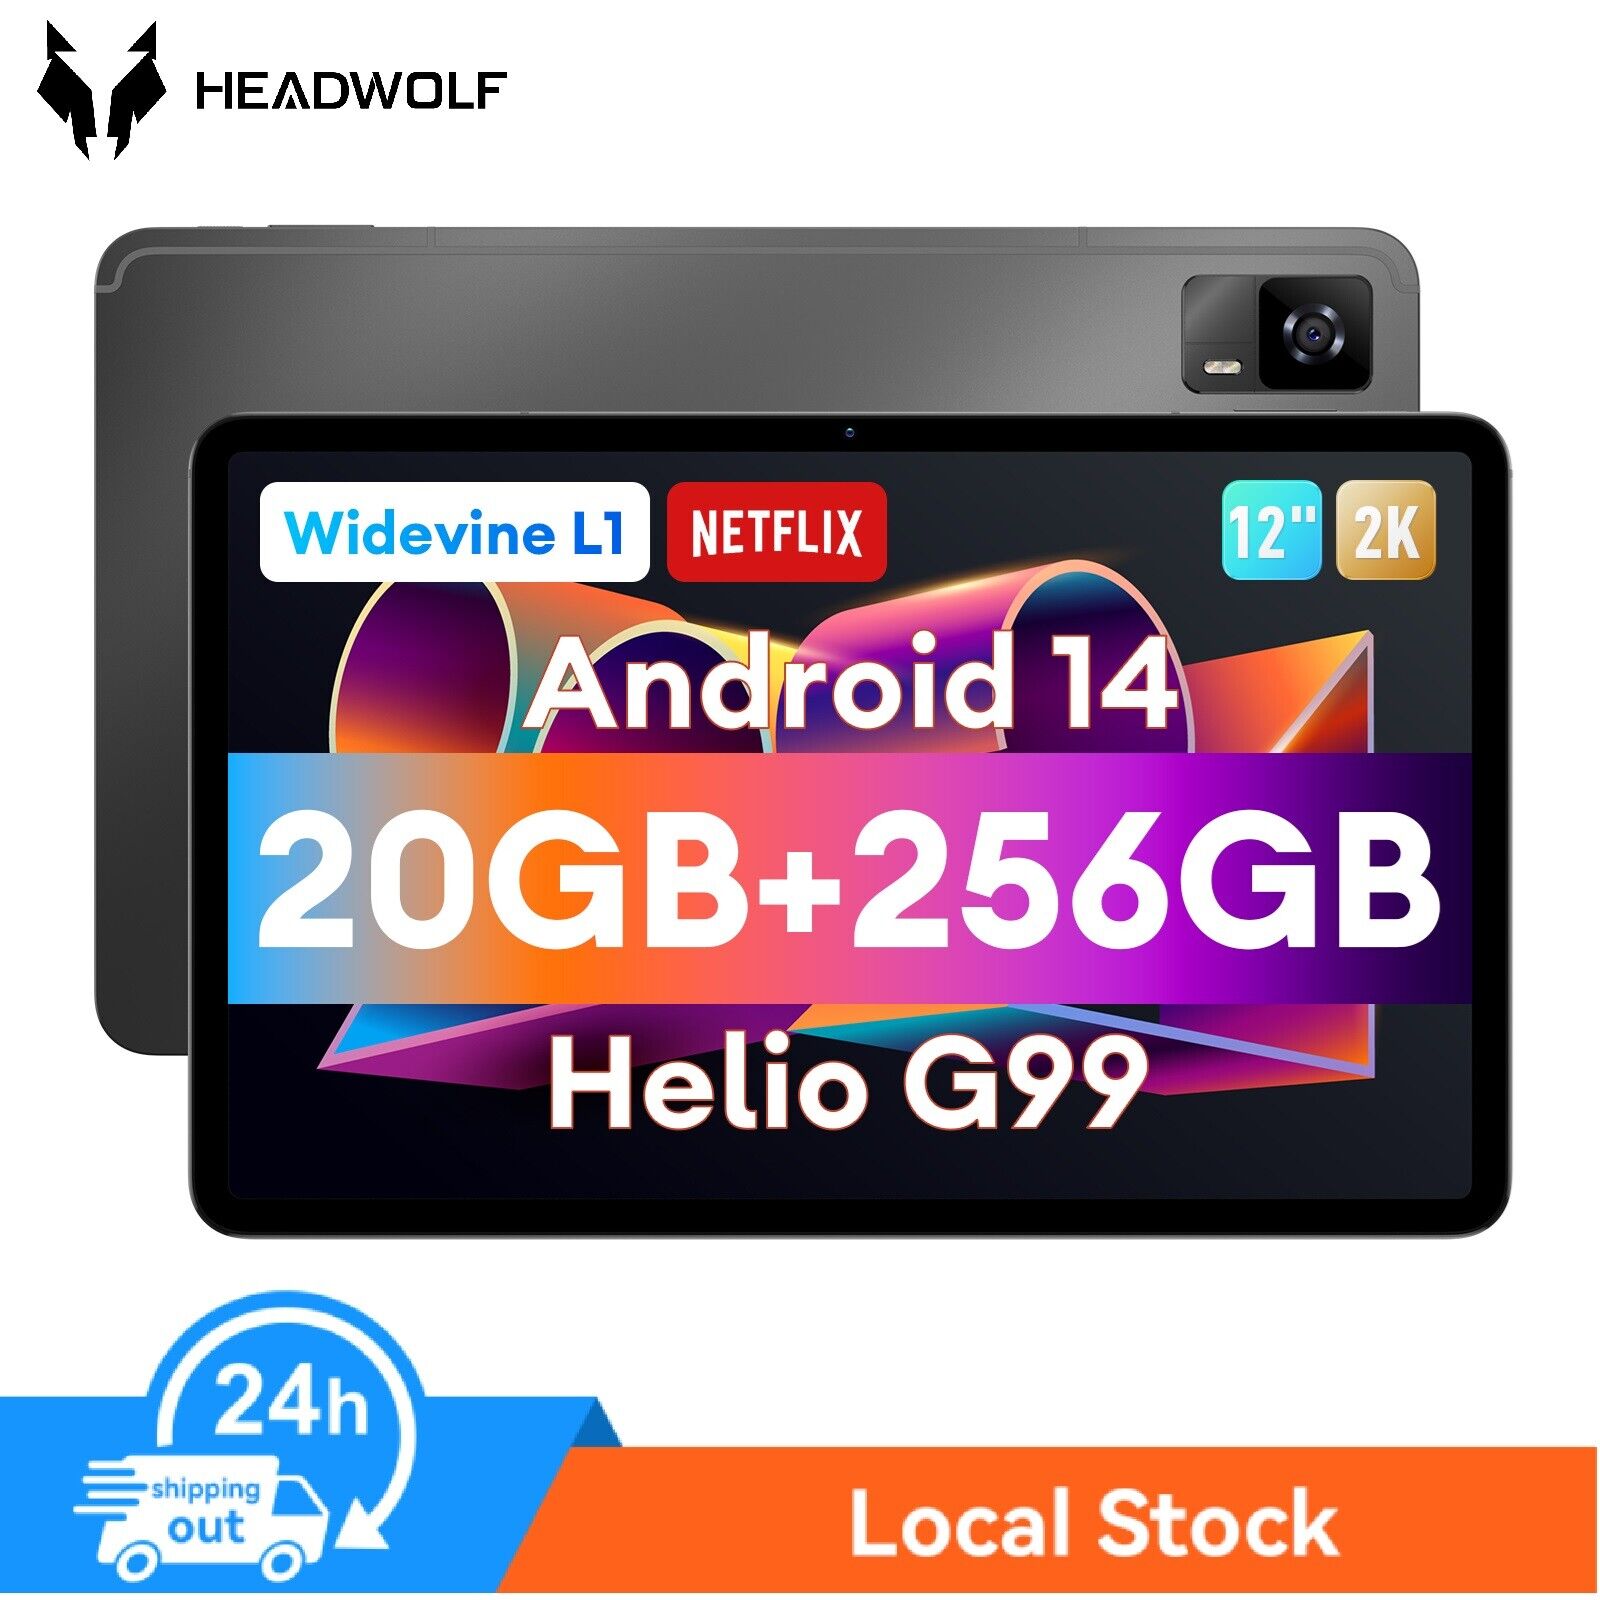 Headwolf Tablet 12 in Android 14 Gaming Tablets PC 12K FHD 20GB RAM 256GB Wi-Fi